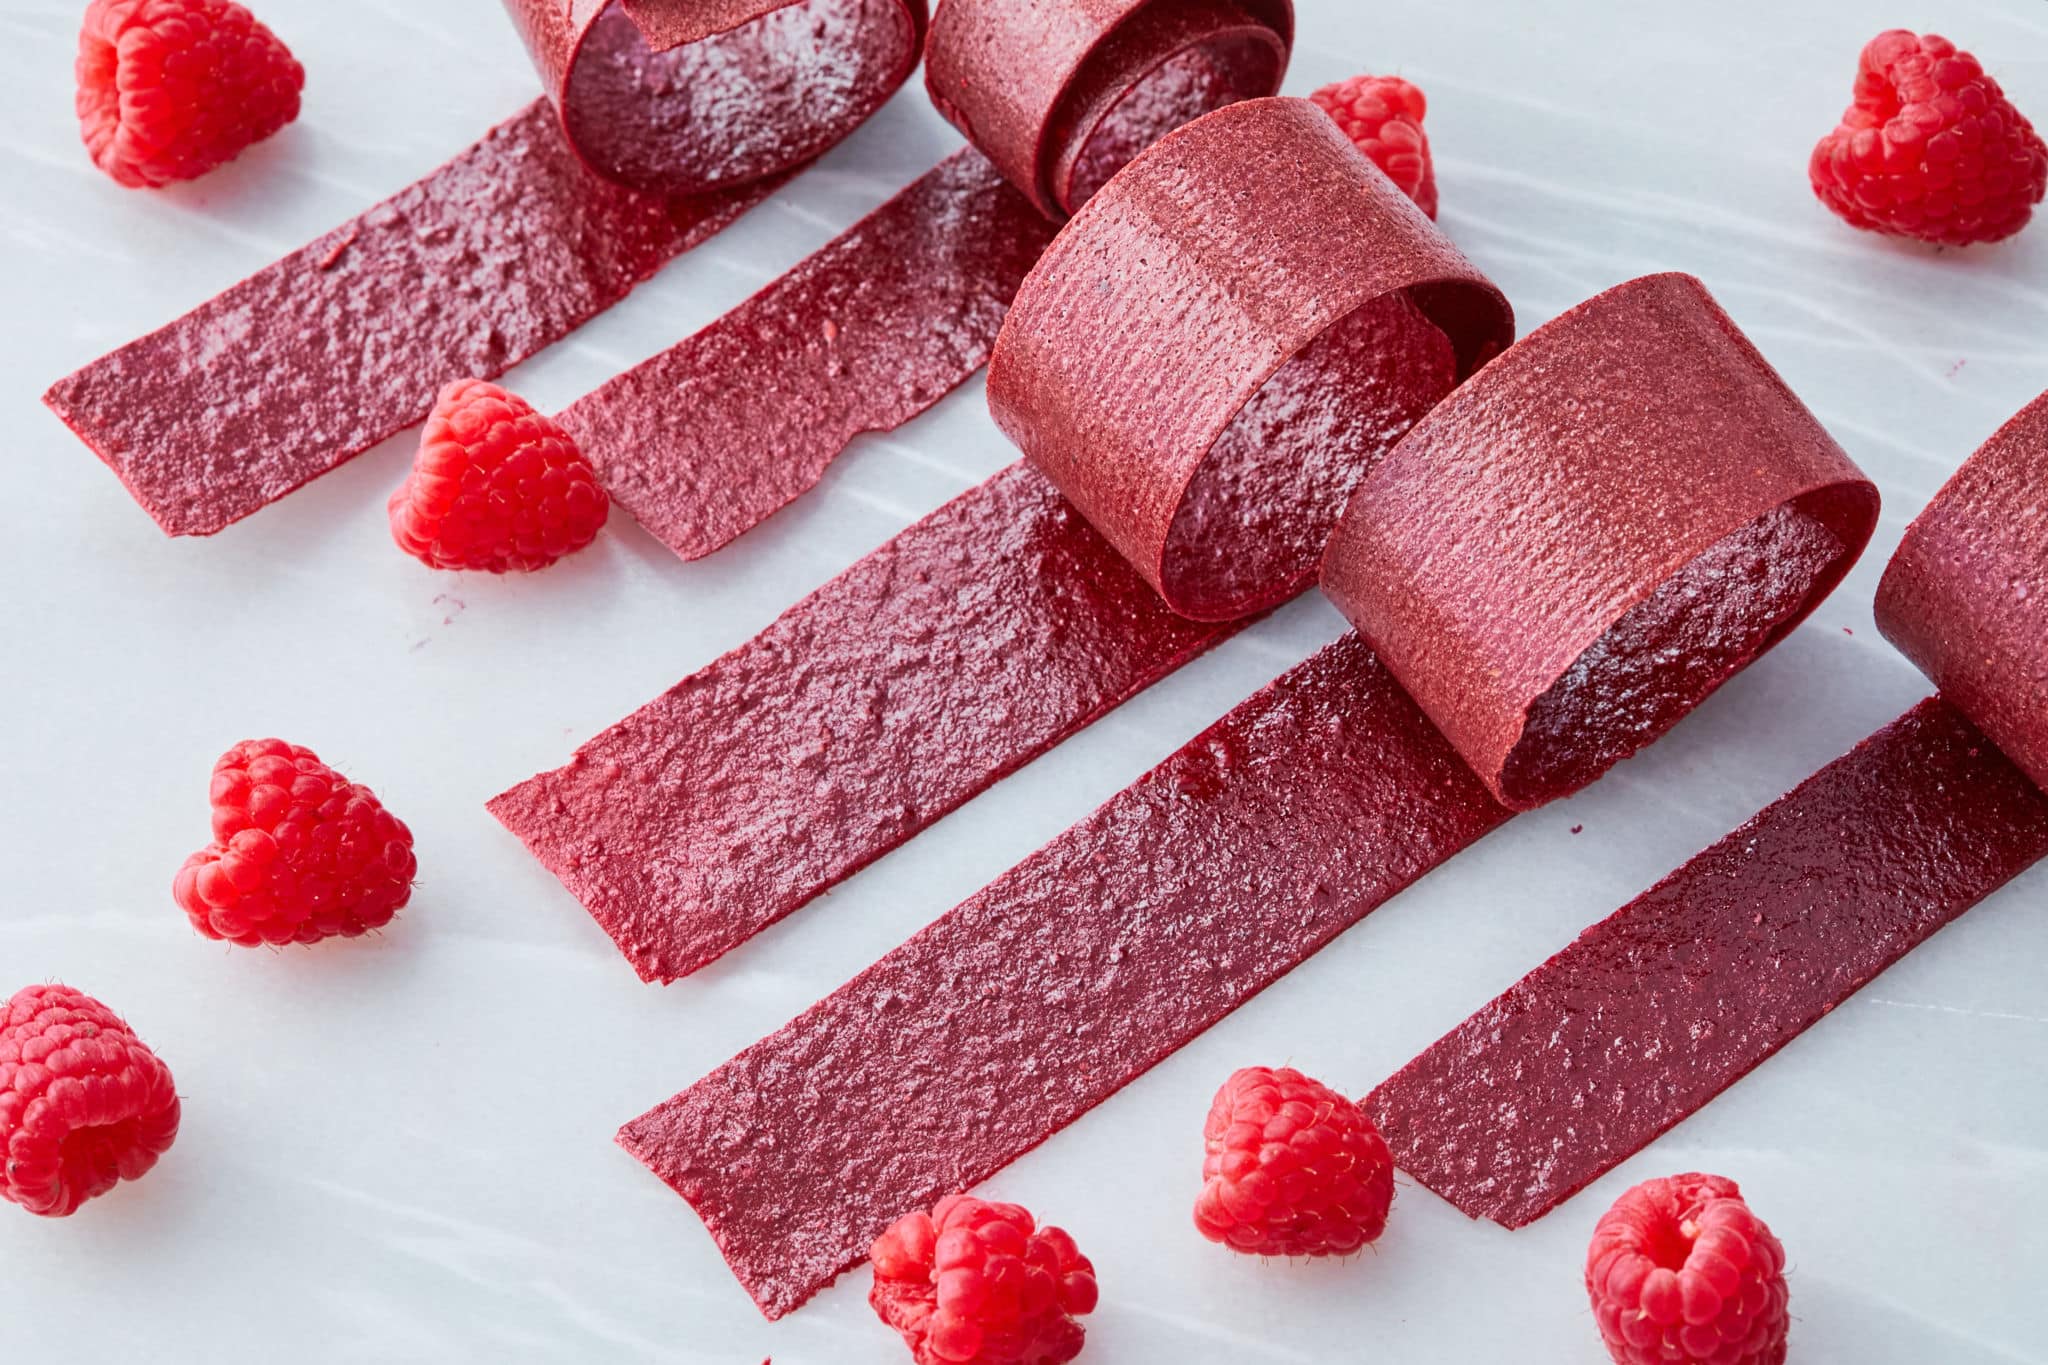 Five individual rolls of raspberry fruit leather are rolled up, exposing just a bit of their end, on a table with raspberries.